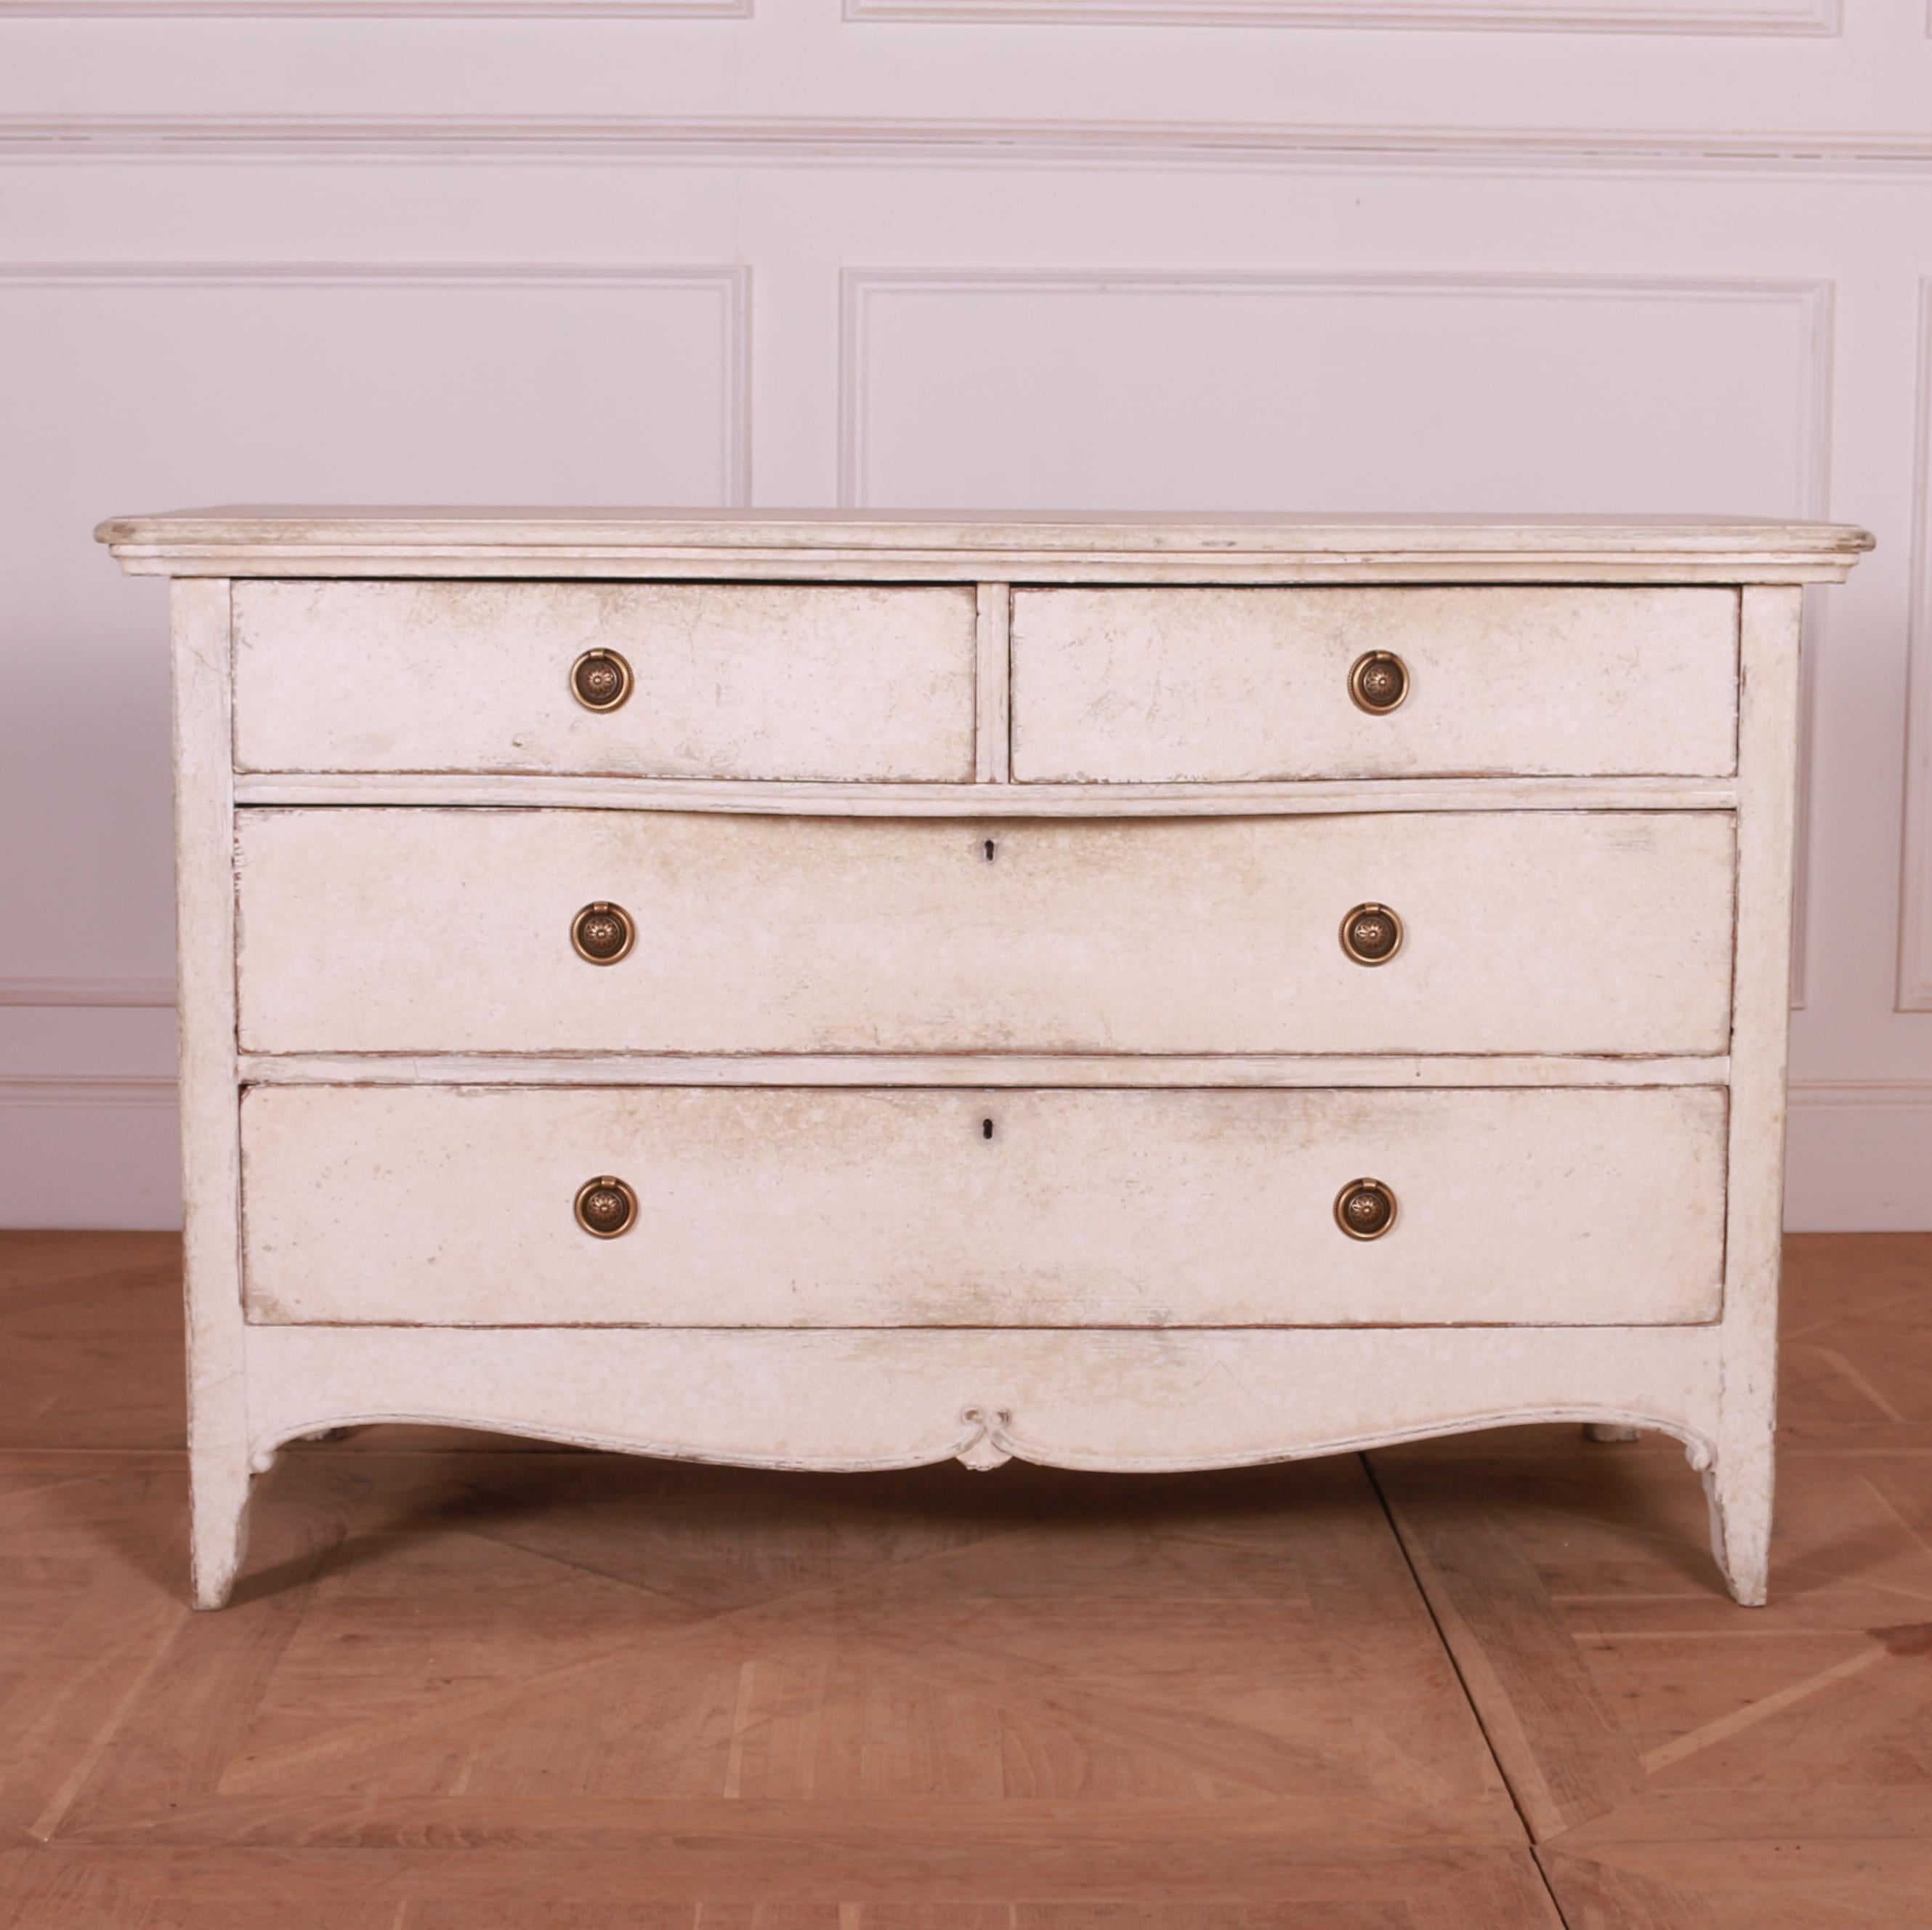 Unusual 19th C Austrian painted pine 4 drawer commode. 1860.



Dimensions
50 inches (127 cms) Wide
24 inches (61 cms) Deep
31.5 inches (80 cms) High.